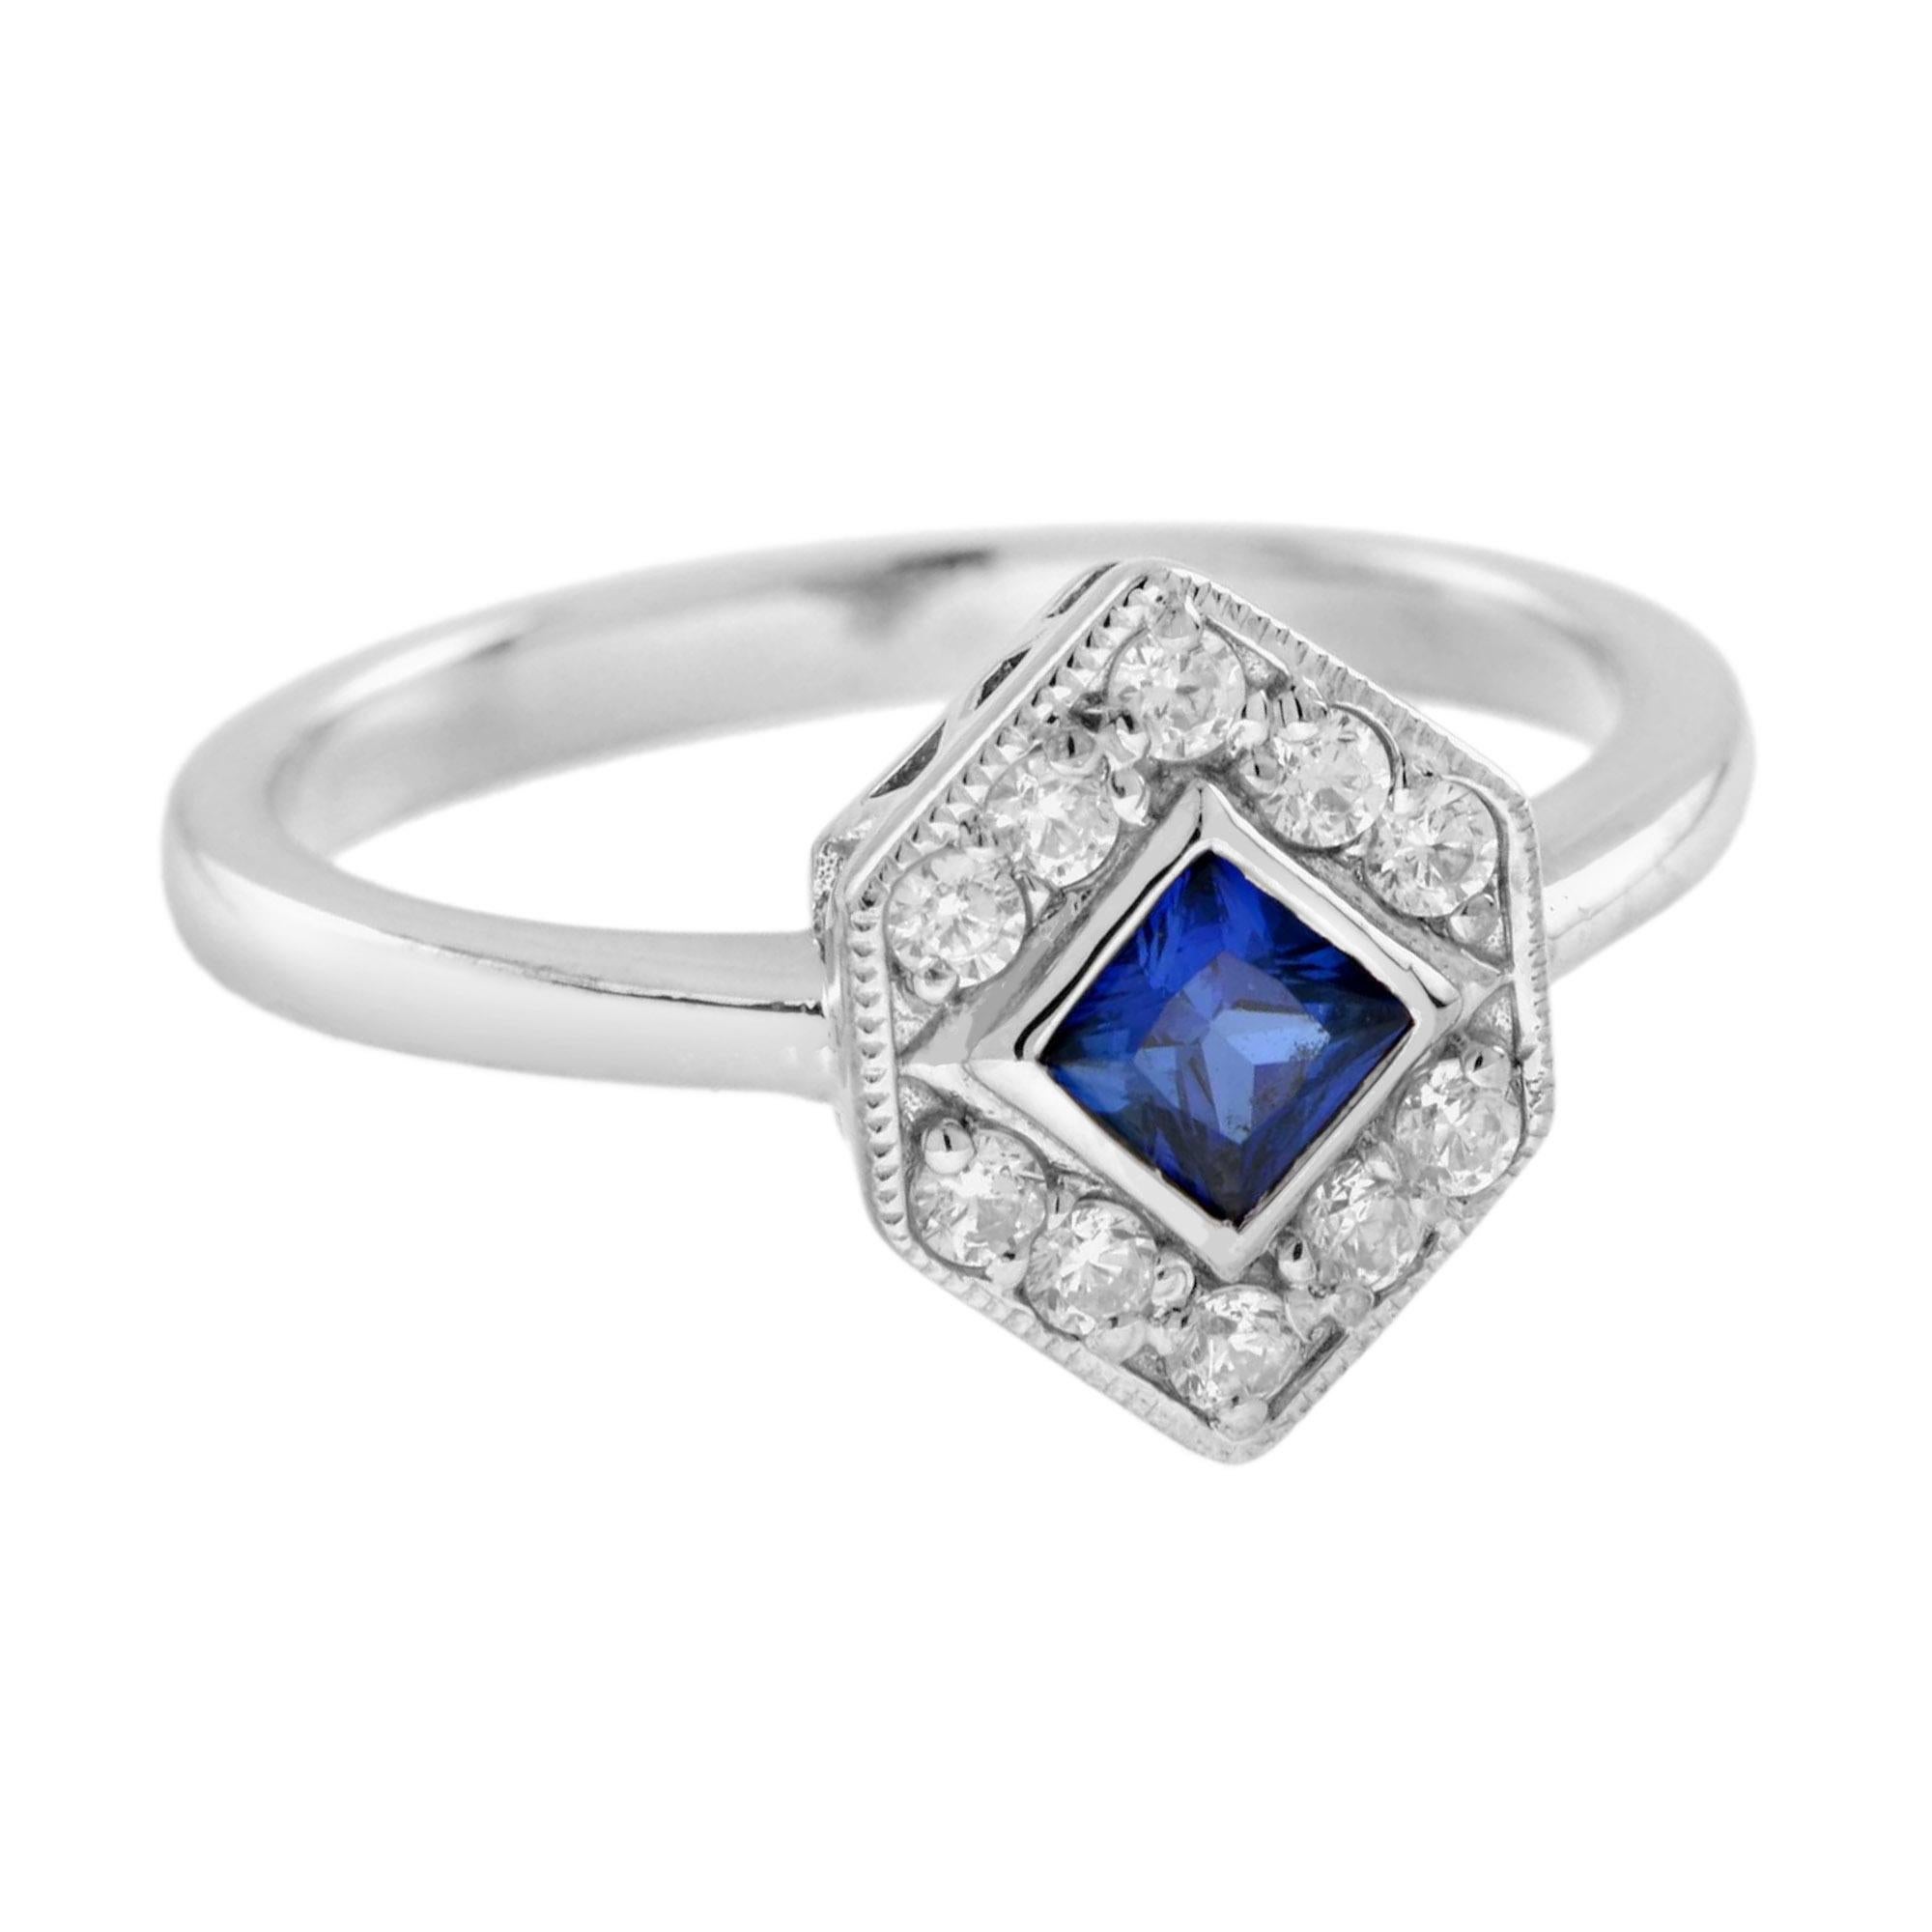 An unusual and very pretty white gold ring that bezel set with a beautiful royal blue square cut sapphire. Around the sapphire in a hexagon design are 0.19 carat diamonds. There is millgrain detail throughout that adds extra detail to this beautiful